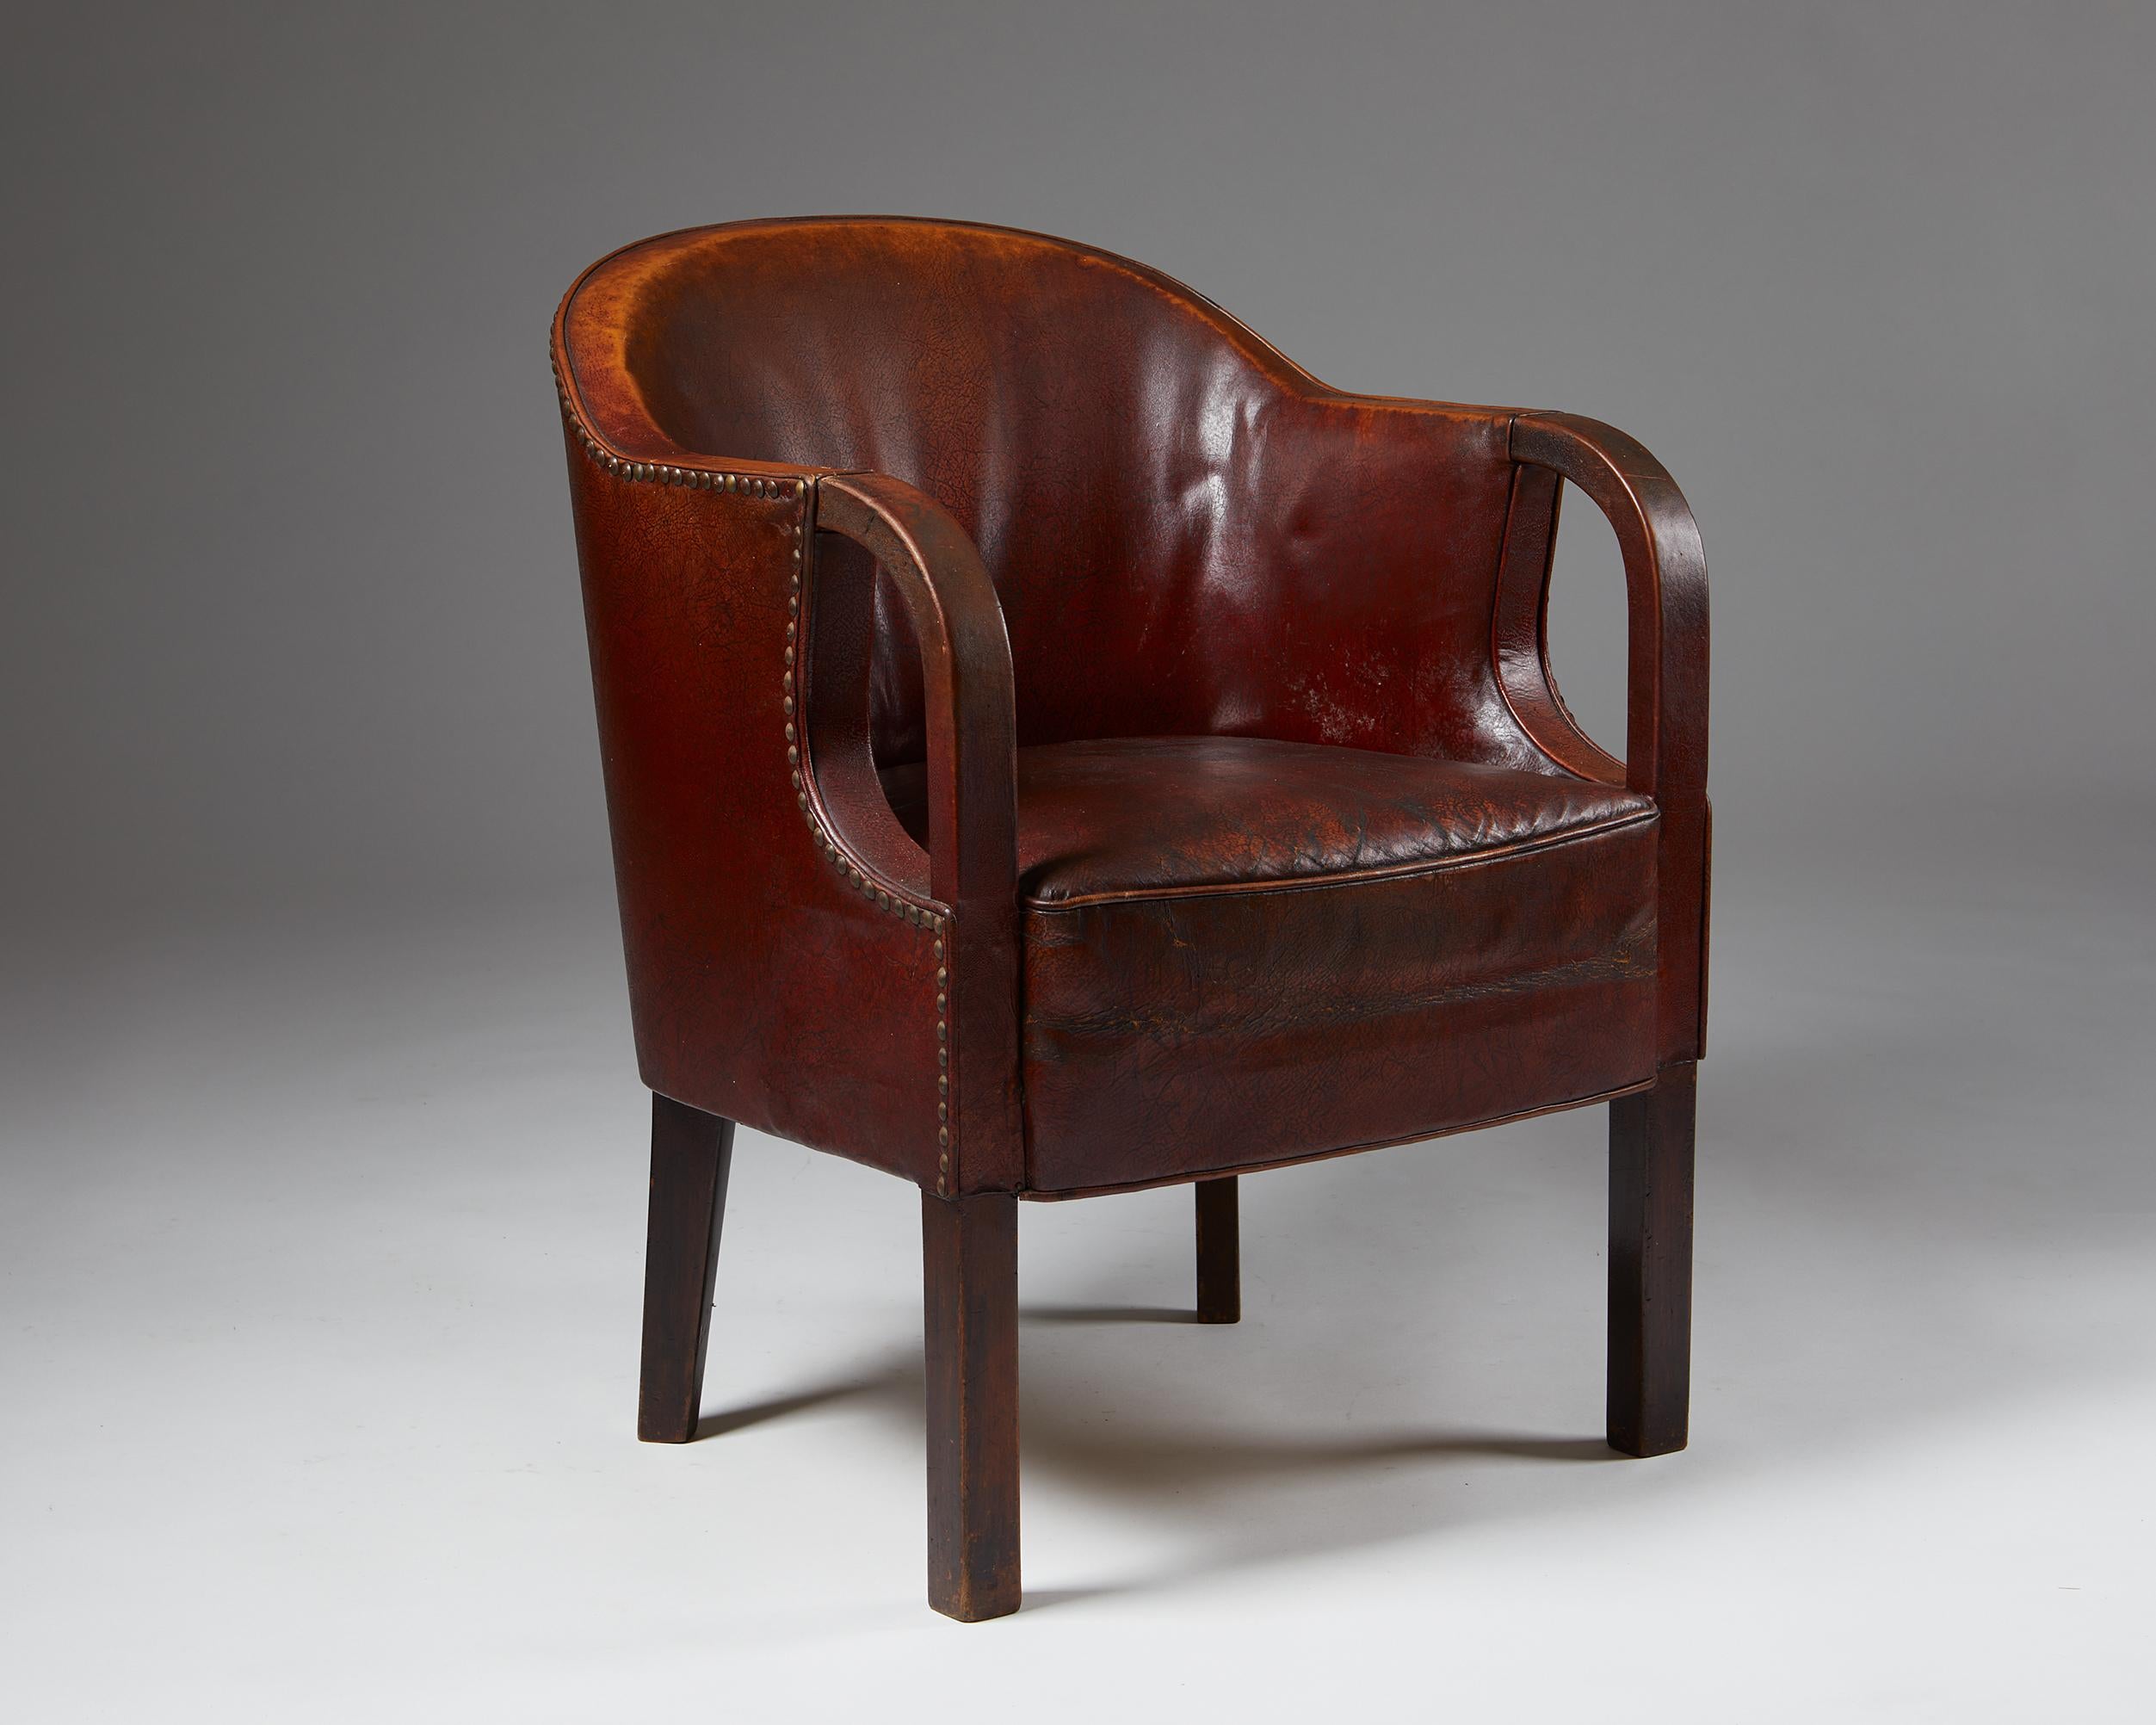 Lounge chair, designed by Kay Fisker,
Denmark, 1930’s.

Mahogany frame and brown leather.

Measurements:
H: 83 cm
SH: 47 cm
W: 52 cm
D: 58 cm